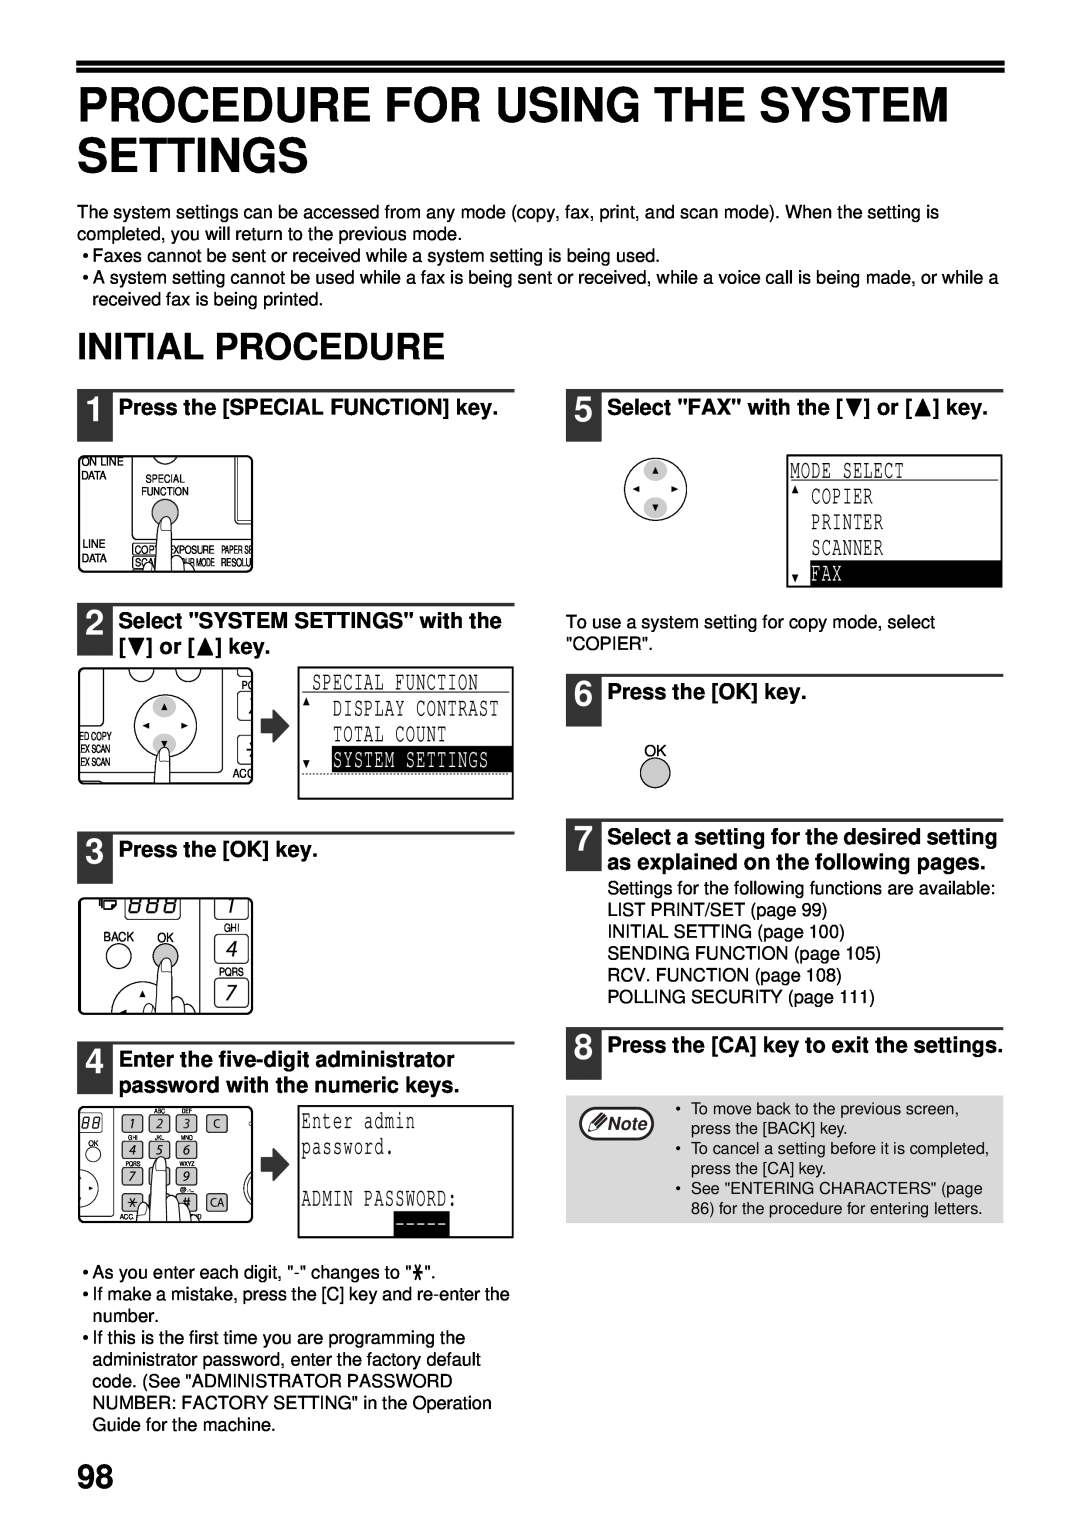 Sharp MX-FX13 Procedure For Using The System Settings, Initial Procedure, Press the SPECIAL FUNCTION key, Press the OK key 